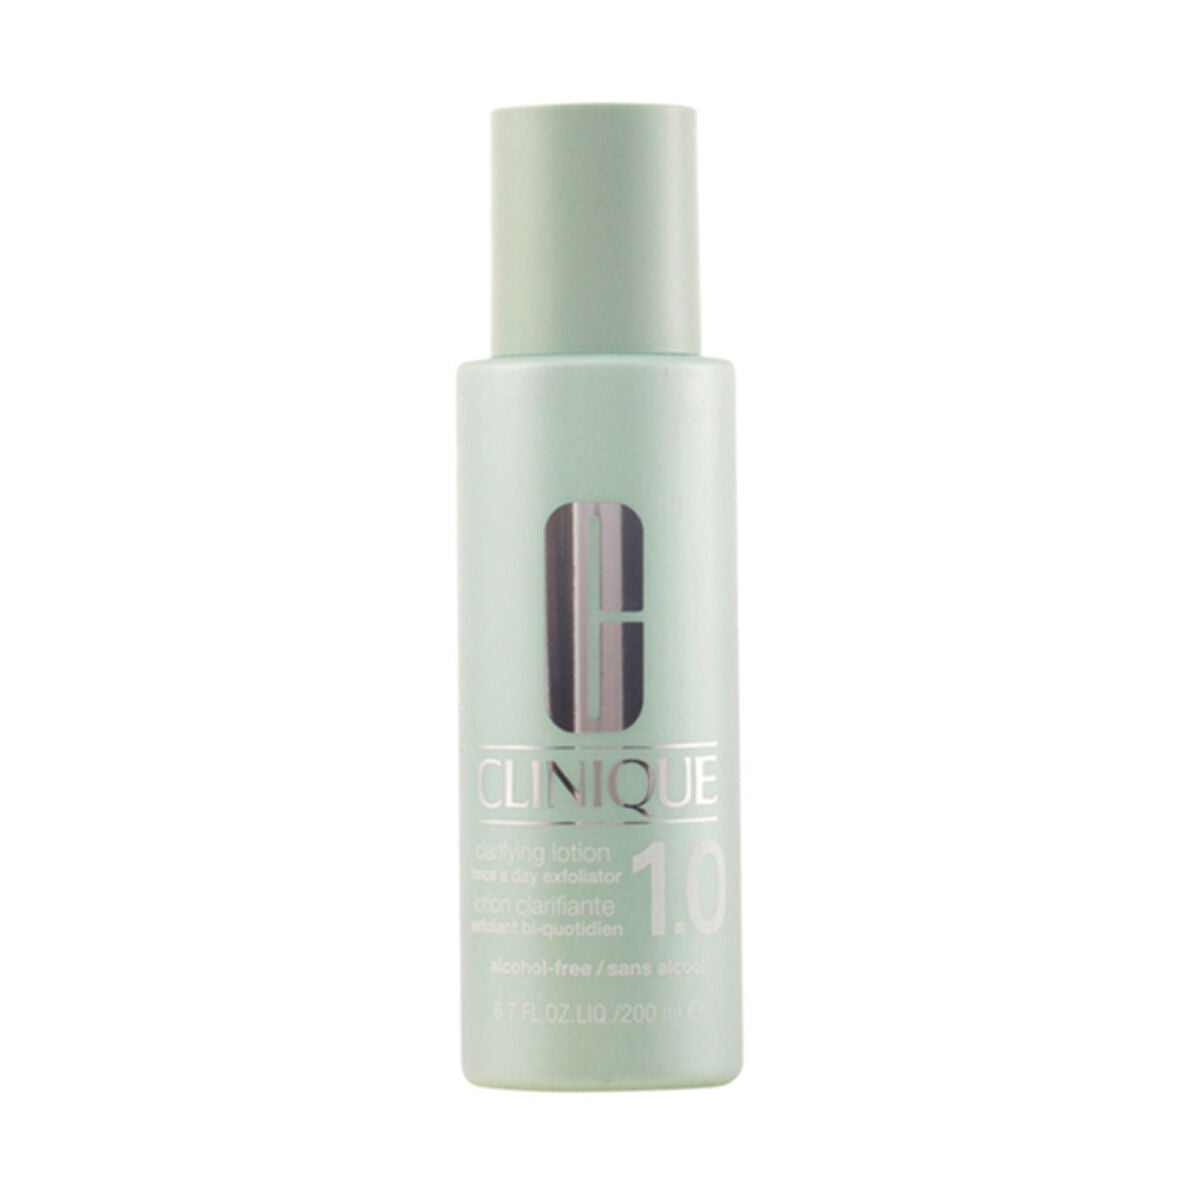 Soothing and Toning Cream with No Alcohol Clarifying Lotion Clinique-0